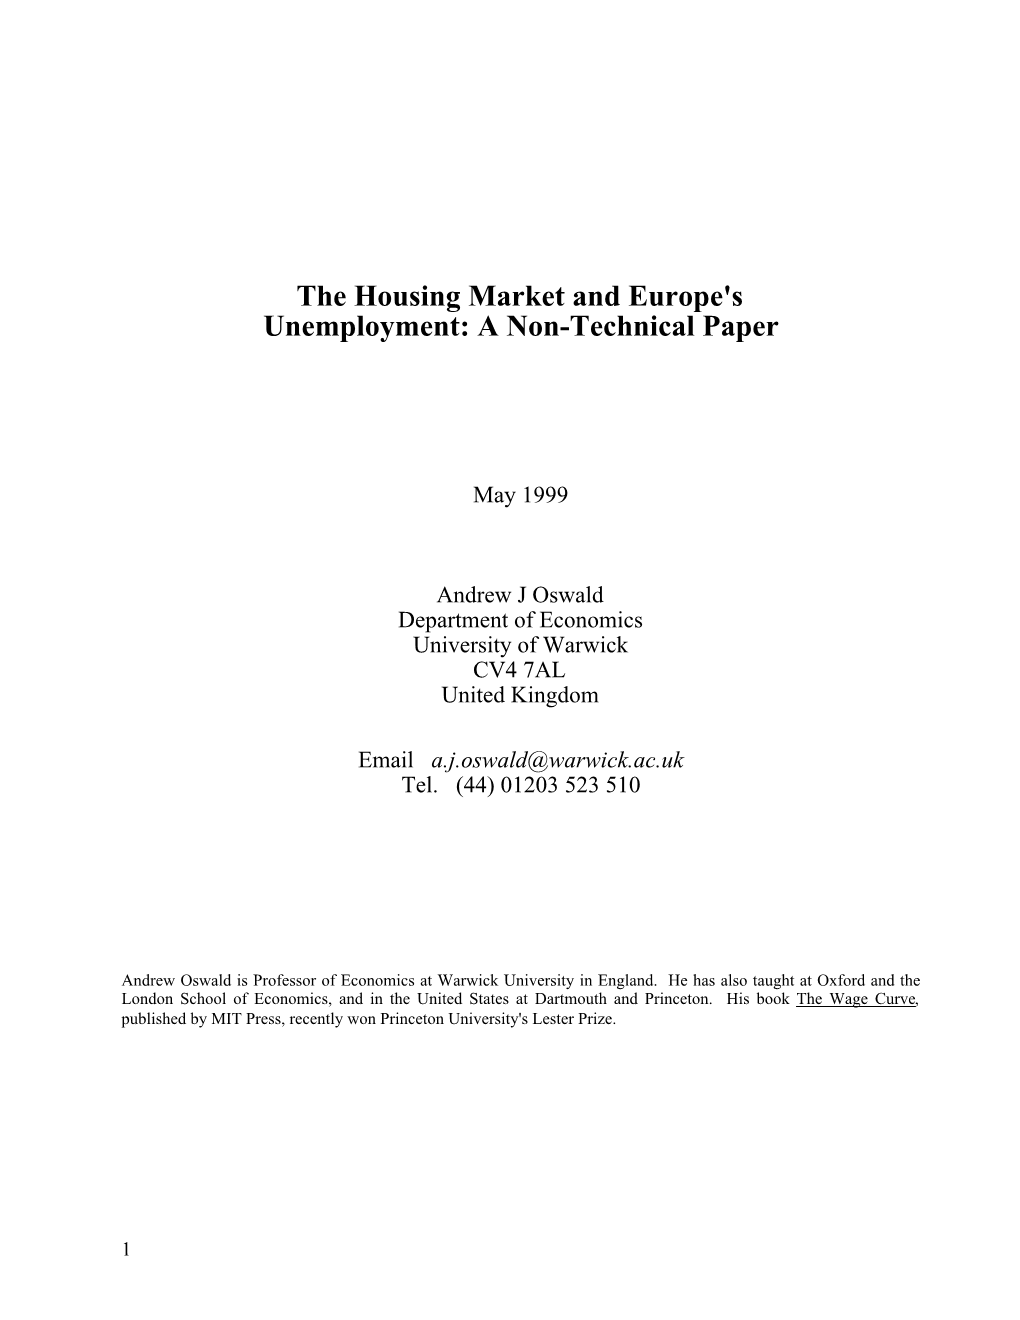 The Housing Market and Europe's Unemployment: a Non-Technical Paper